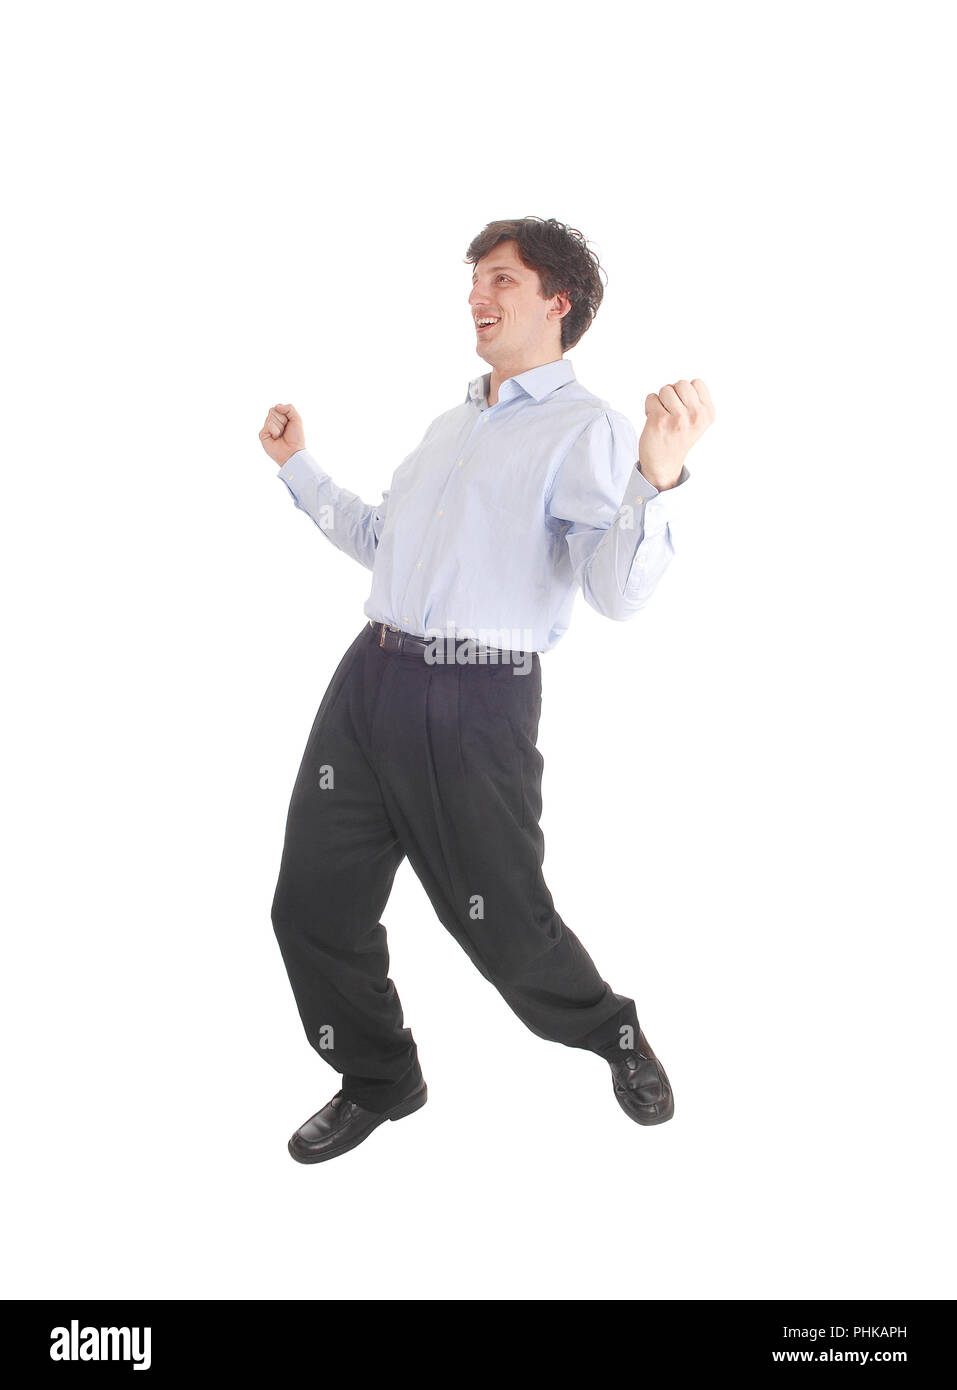 Happy young man dancing in shirt and dress pants Stock Photo